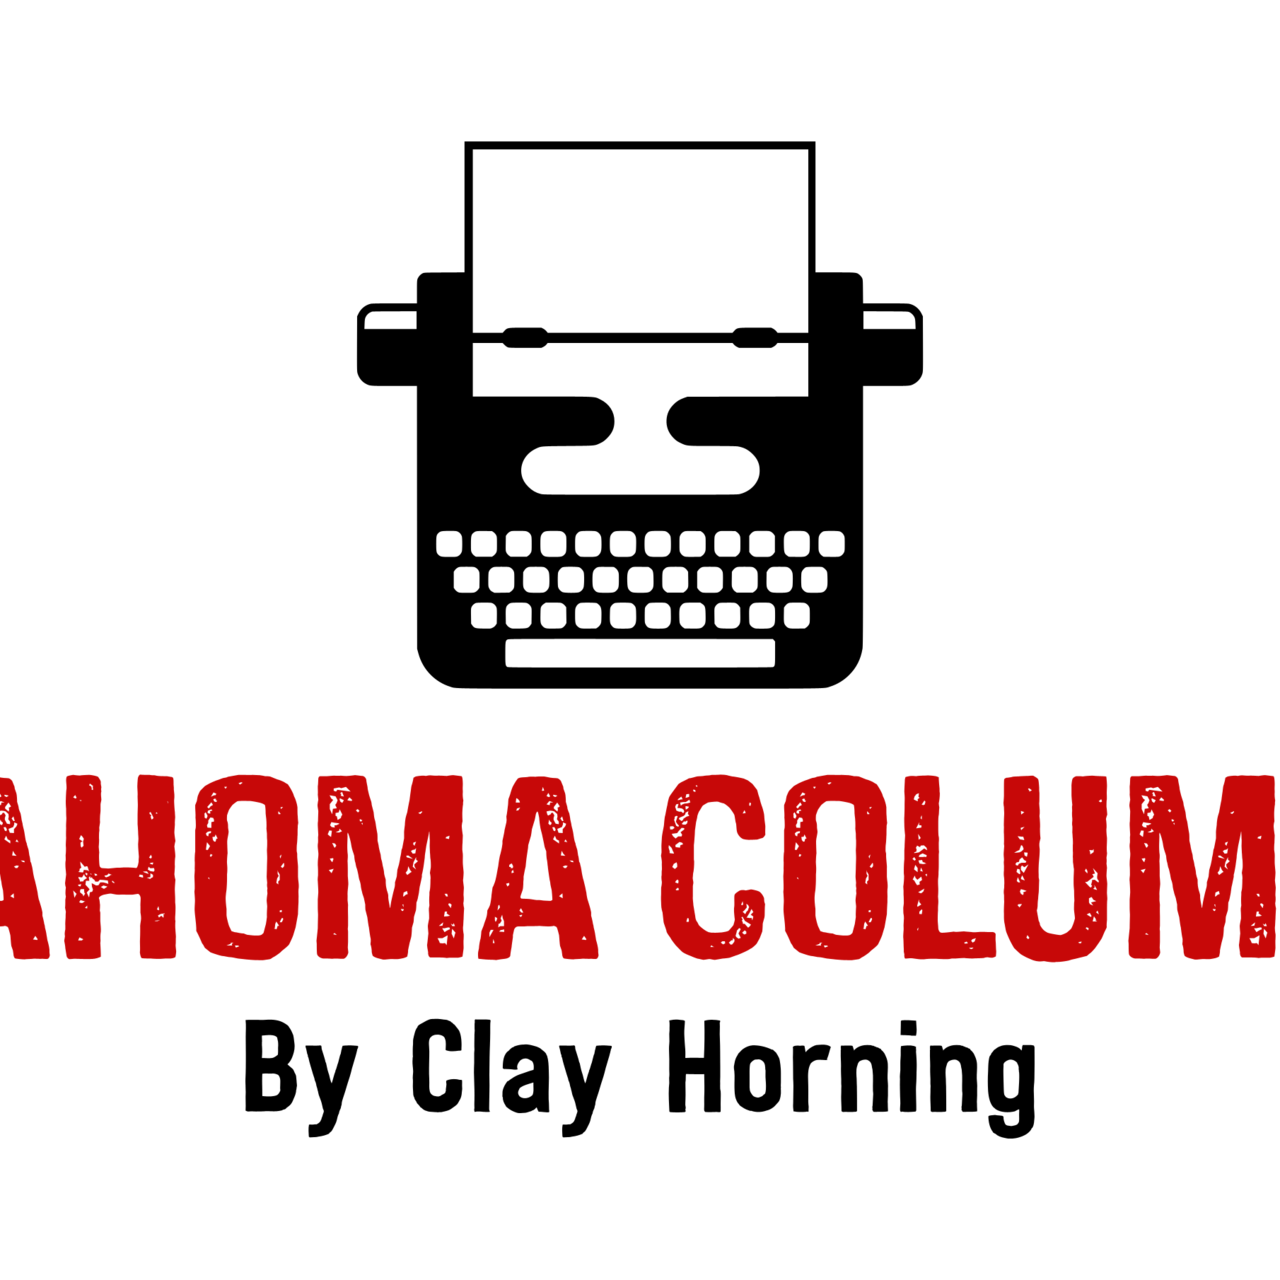 Artwork for Oklahoma Columnist, by Clay Horning